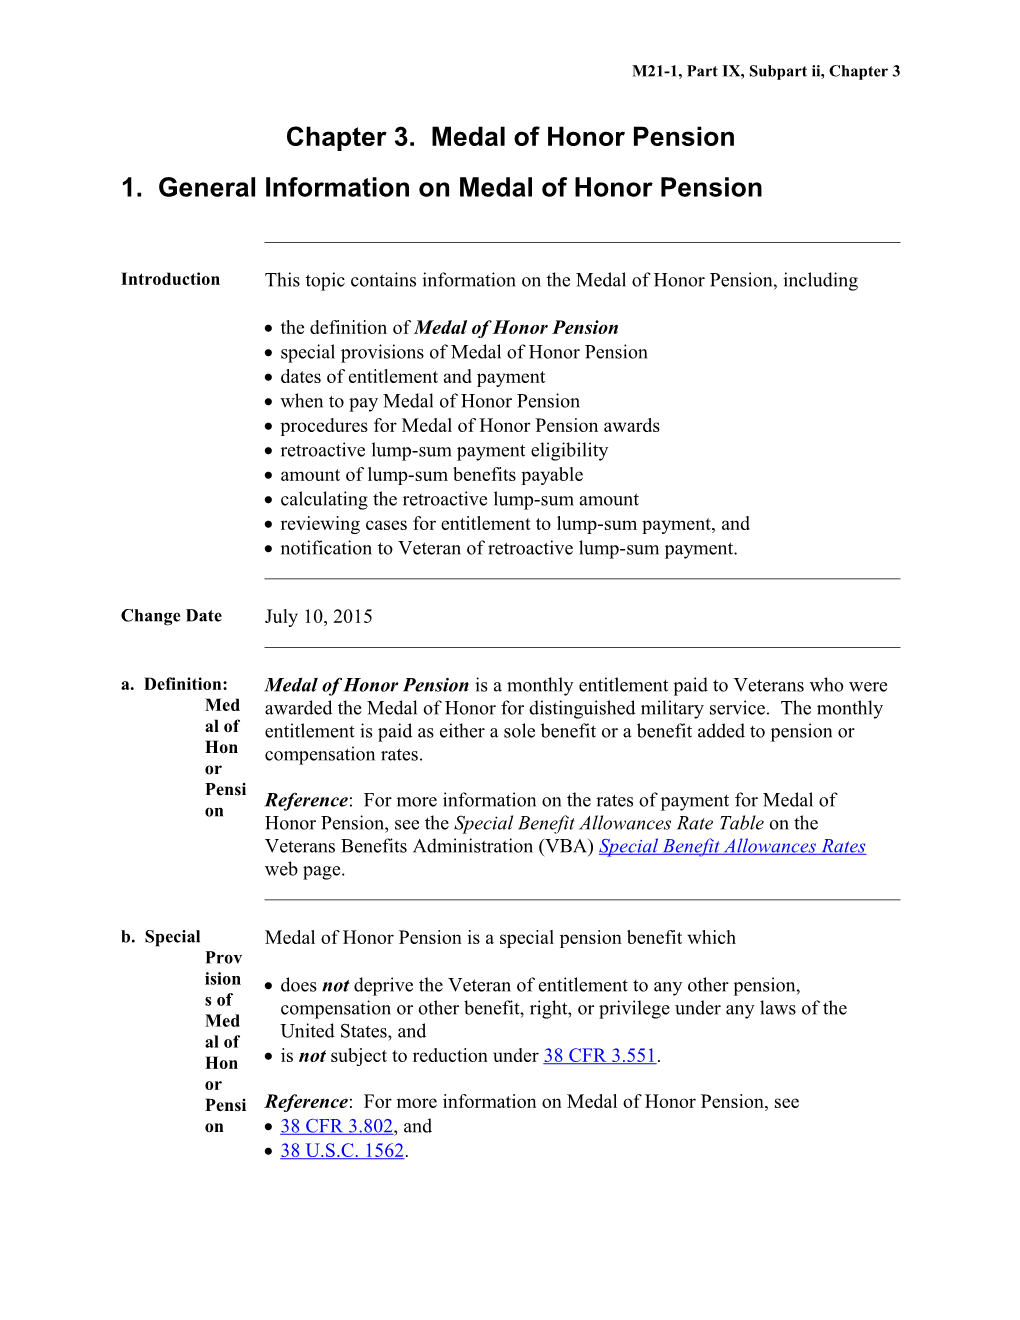 M21-1MR, Part 9, Subpartii, Chapter 1, Section E. Medal of Honor Pension